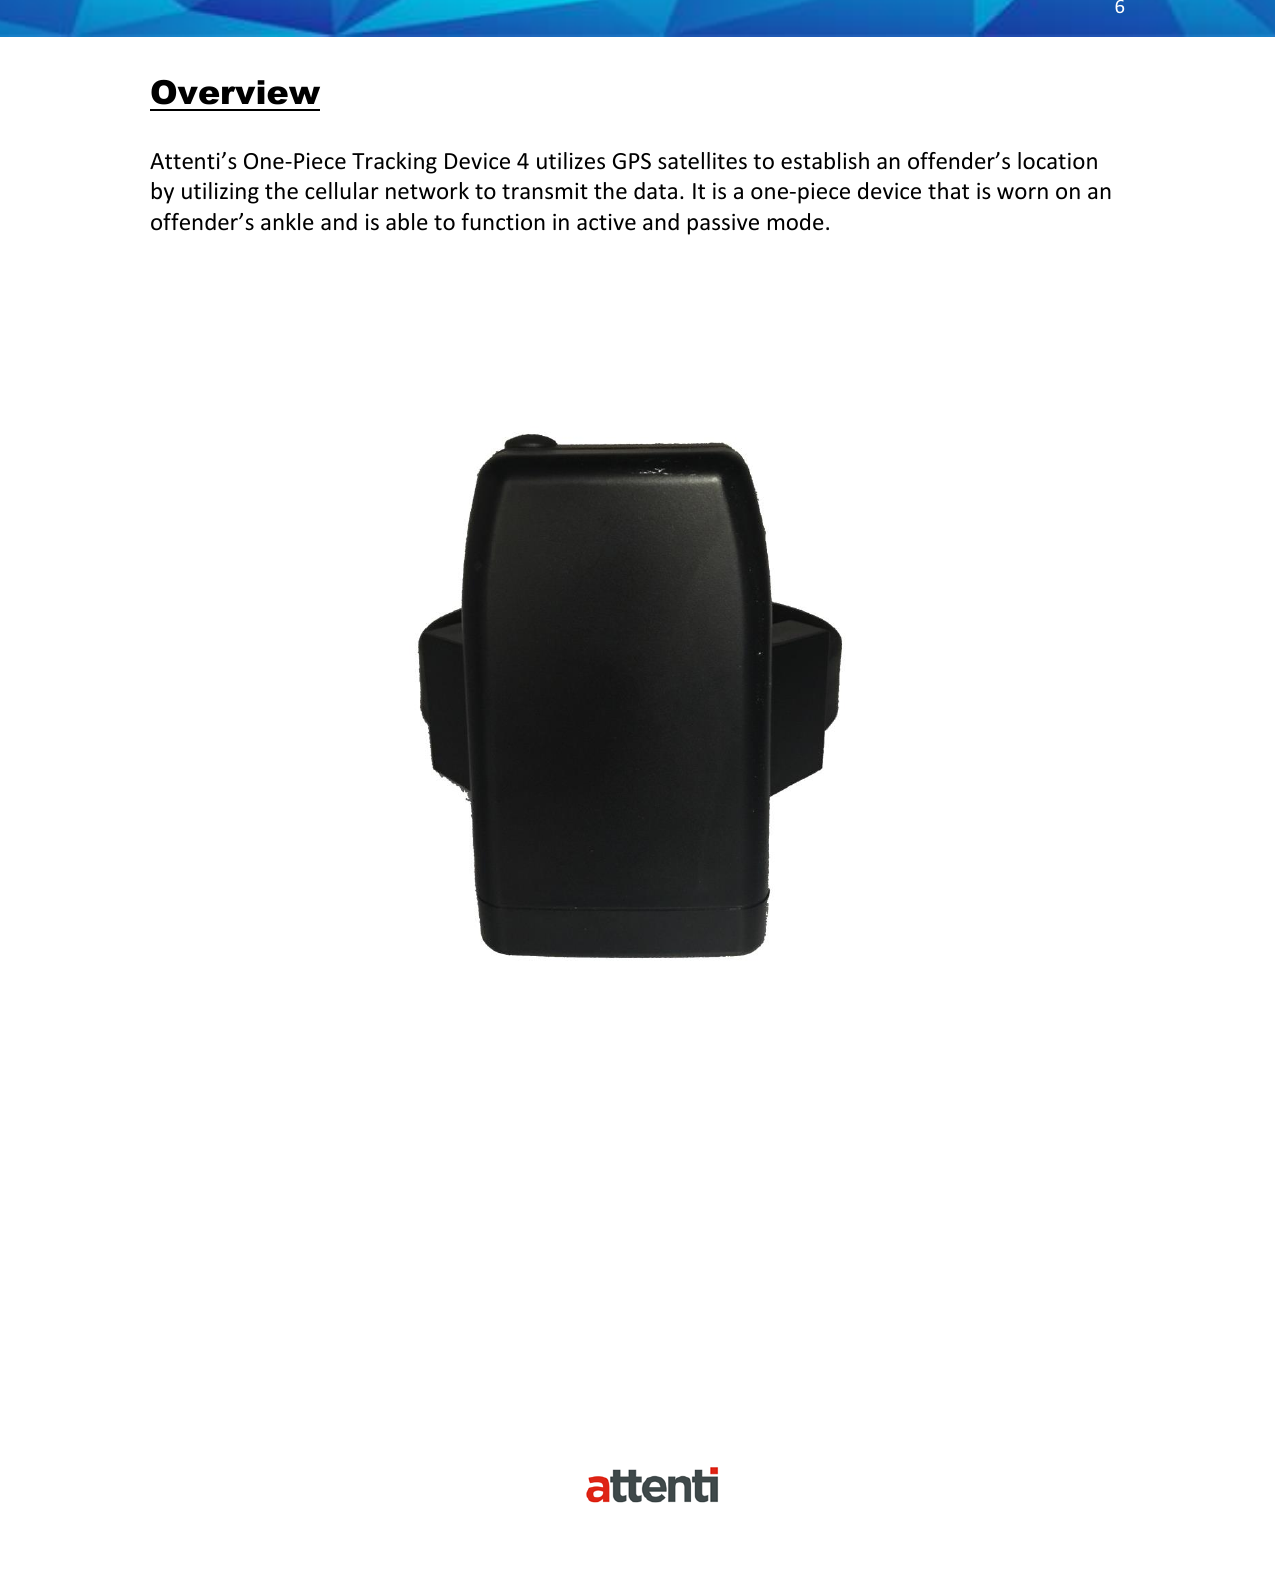       6          Overview  Attenti’s One-Piece Tracking Device 4 utilizes GPS satellites to establish an offender’s location by utilizing the cellular network to transmit the data. It is a one-piece device that is worn on an offender’s ankle and is able to function in active and passive mode.                                                          